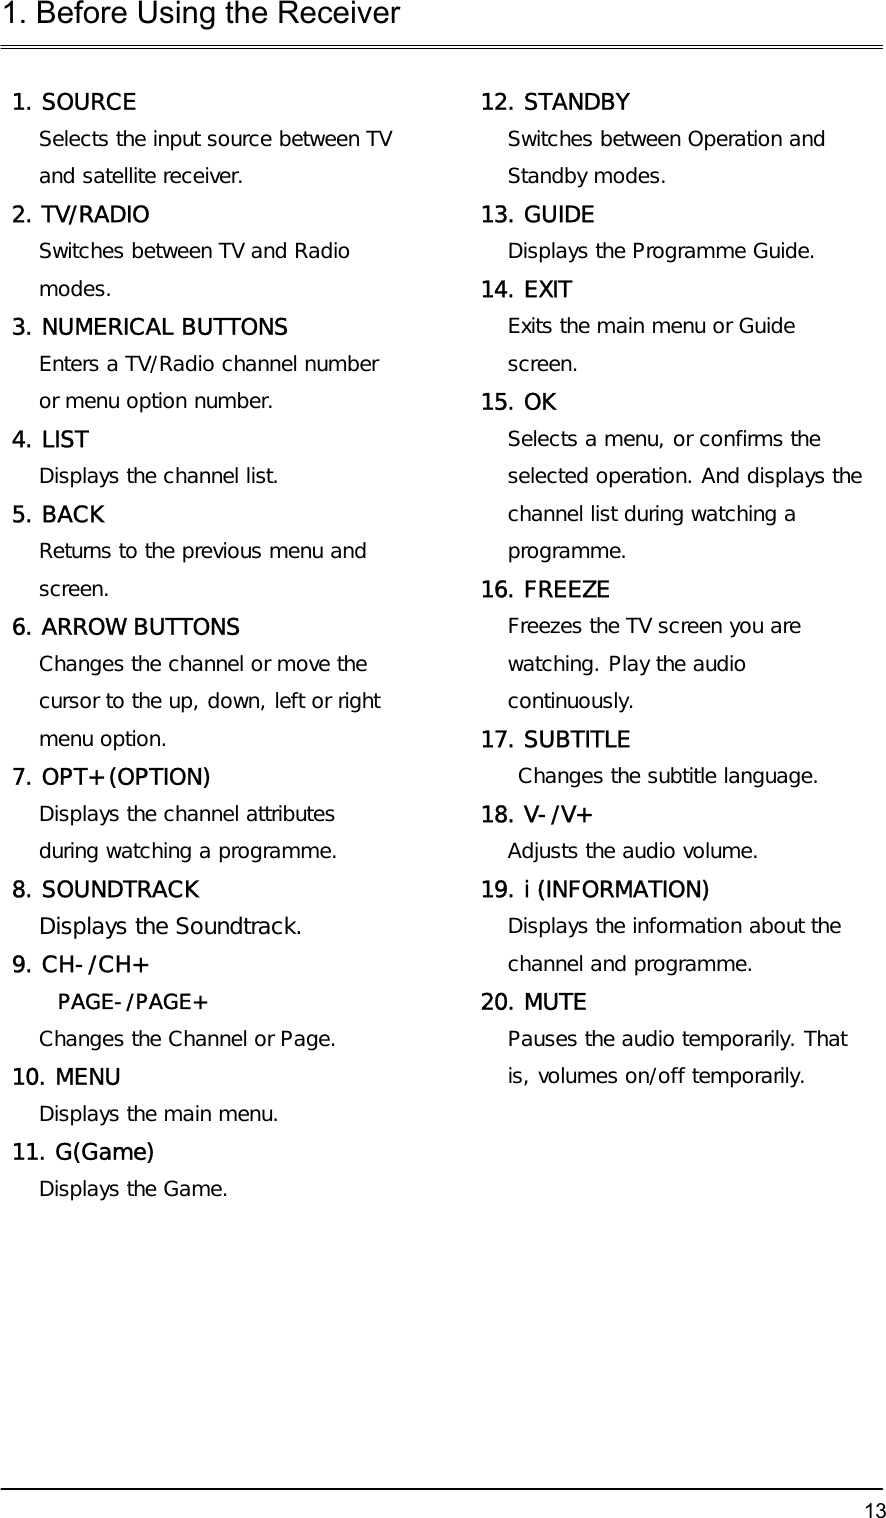 1. Before Using the Receiver  131. SOURCE Selects the input source between TV and satellite receiver. 2. TV/RADIO  Switches between TV and Radio modes. 3. NUMERICAL BUTTONS Enters a TV/Radio channel number or menu option number. 4. LIST Displays the channel list.  5. BACK Returns to the previous menu and screen. 6. ARROW BUTTONS Changes the channel or move the cursor to the up, down, left or right menu option. 7. OPT+ (OPTION) Displays the channel attributes during watching a programme. 8. SOUNDTRACK Displays the Soundtrack.  9. CH-/CH+  PAGE-/PAGE+ Changes the Channel or Page.  10. MENU Displays the main menu.  11. G(Game) Displays the Game.    12. STANDBY Switches between Operation and Standby modes. 13. GUIDE Displays the Programme Guide. 14. EXIT  Exits the main menu or Guide screen. 15. OK  Selects a menu, or confirms the selected operation. And displays the channel list during watching a programme. 16. FREEZE Freezes the TV screen you are watching. Play the audio continuously. 17. SUBTITLE  Changes the subtitle language.  18. V-/V+ Adjusts the audio volume. 19. i (INFORMATION) Displays the information about the channel and programme. 20. MUTE Pauses the audio temporarily. That is, volumes on/off temporarily.     